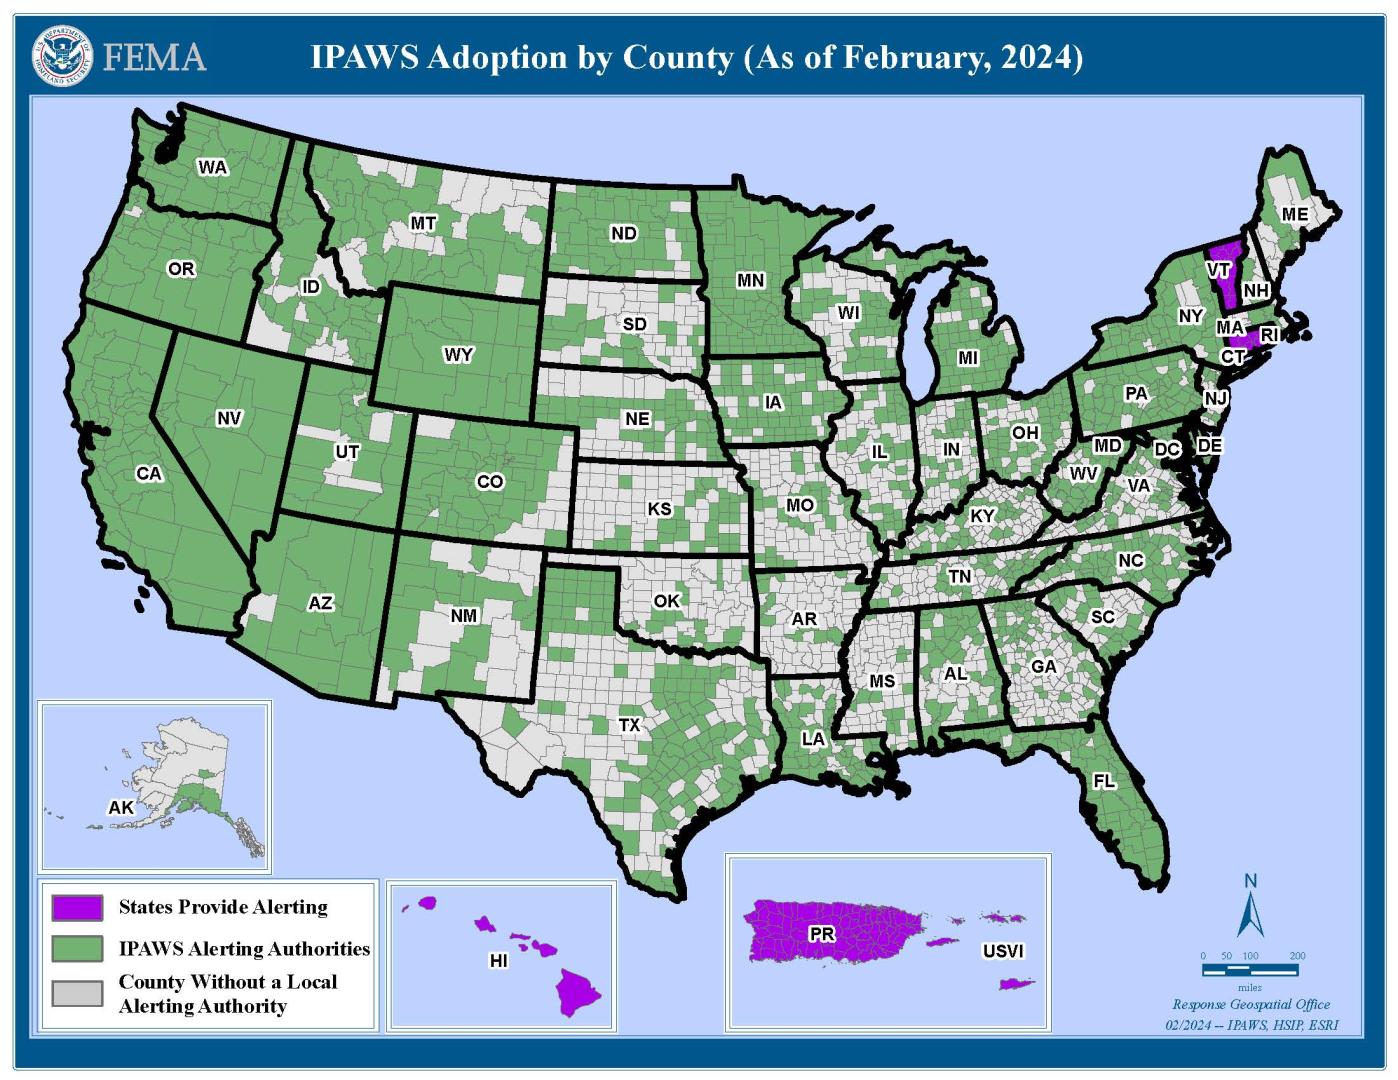 U.S. map of IPAWS adoption by county as of February 2024